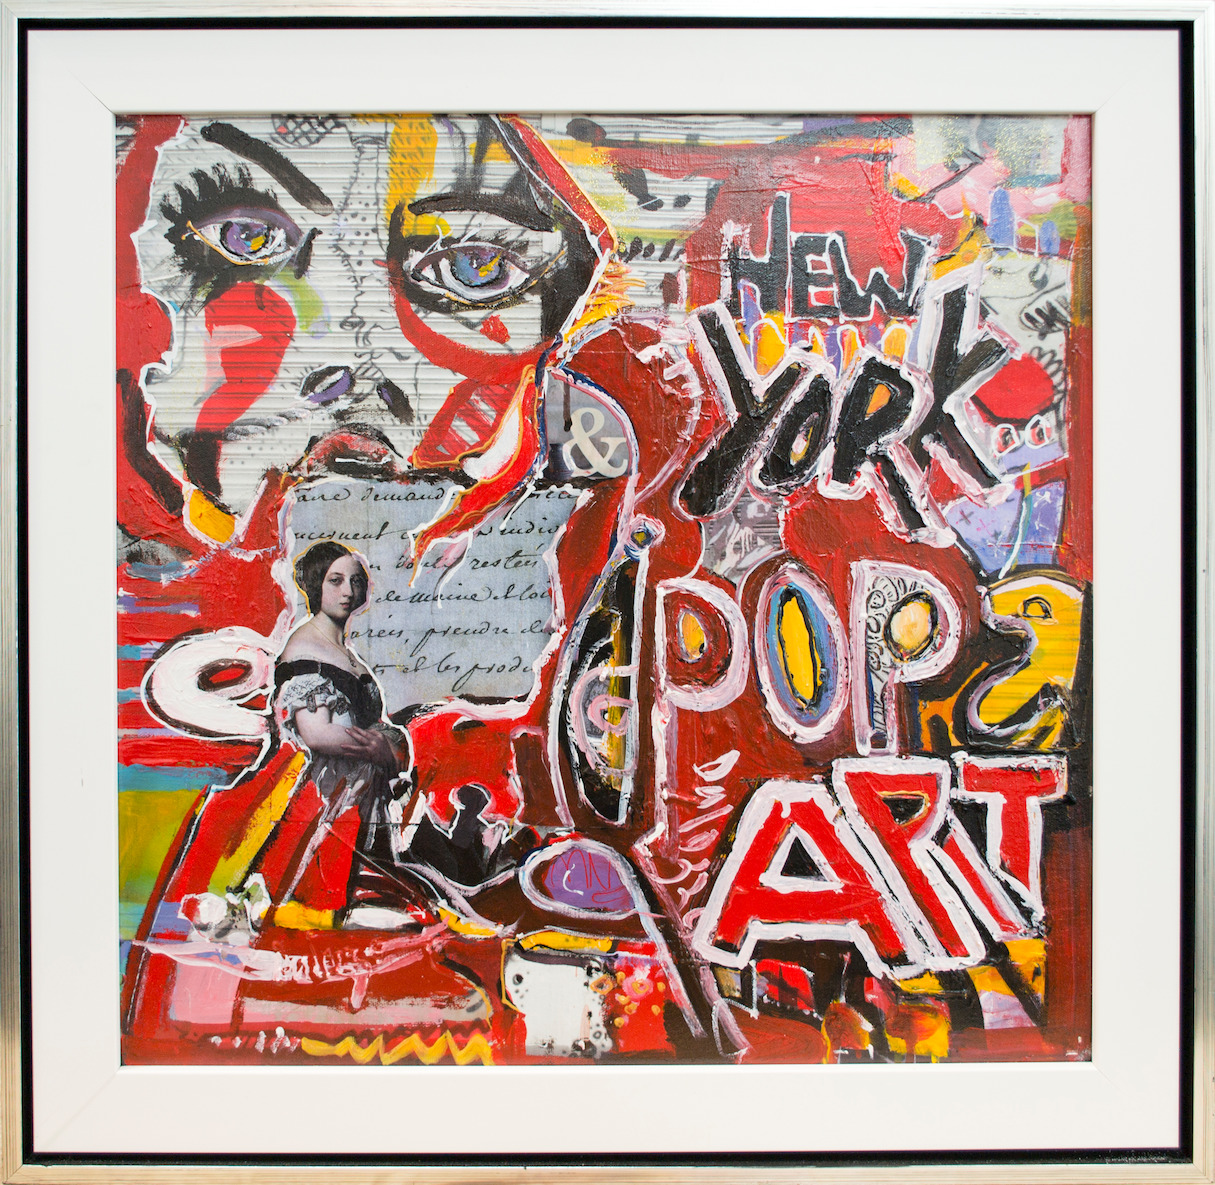 Framed Front View Of Cityscape Painting "New York Pops" By Lucette Dalozzo